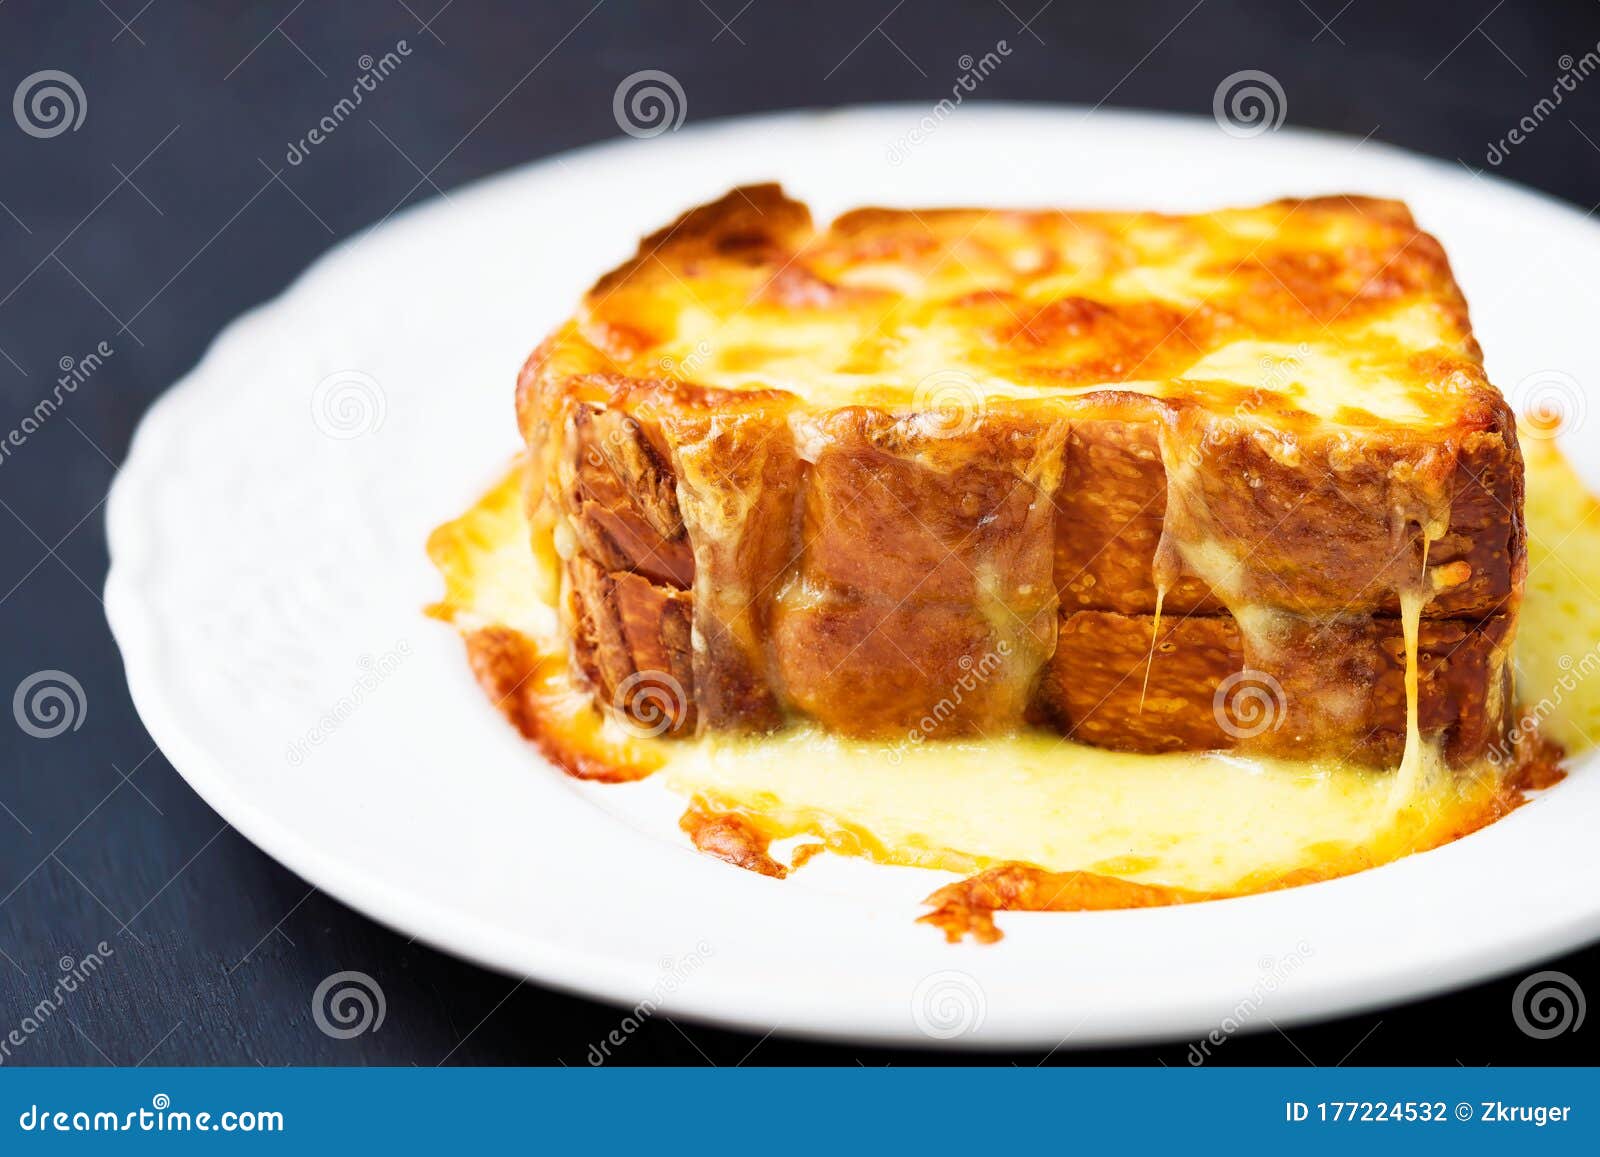 Rustic American Comfort Food Grilled Cheese Sandwich Stock Photo ...